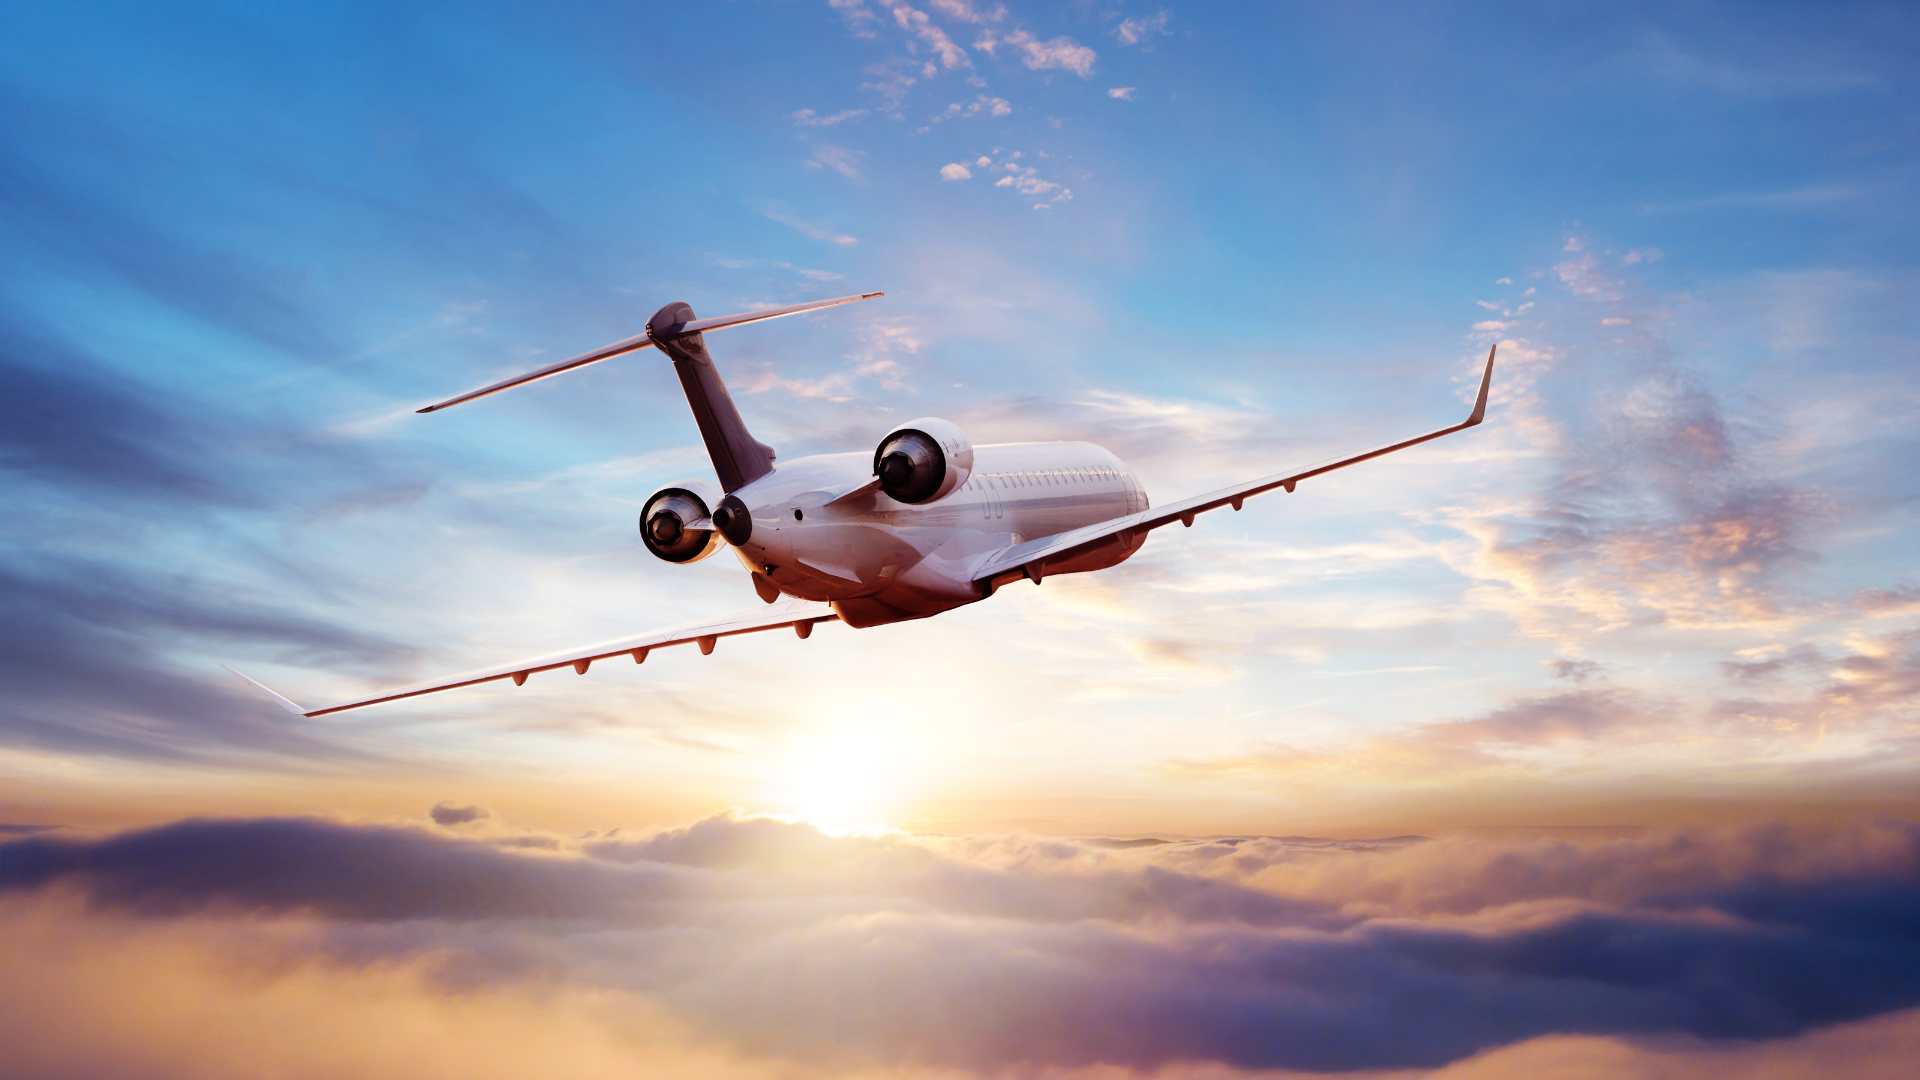 Global Leader in Private Aviation Partners with Opportune To Prepare for a Capital Markets Transaction